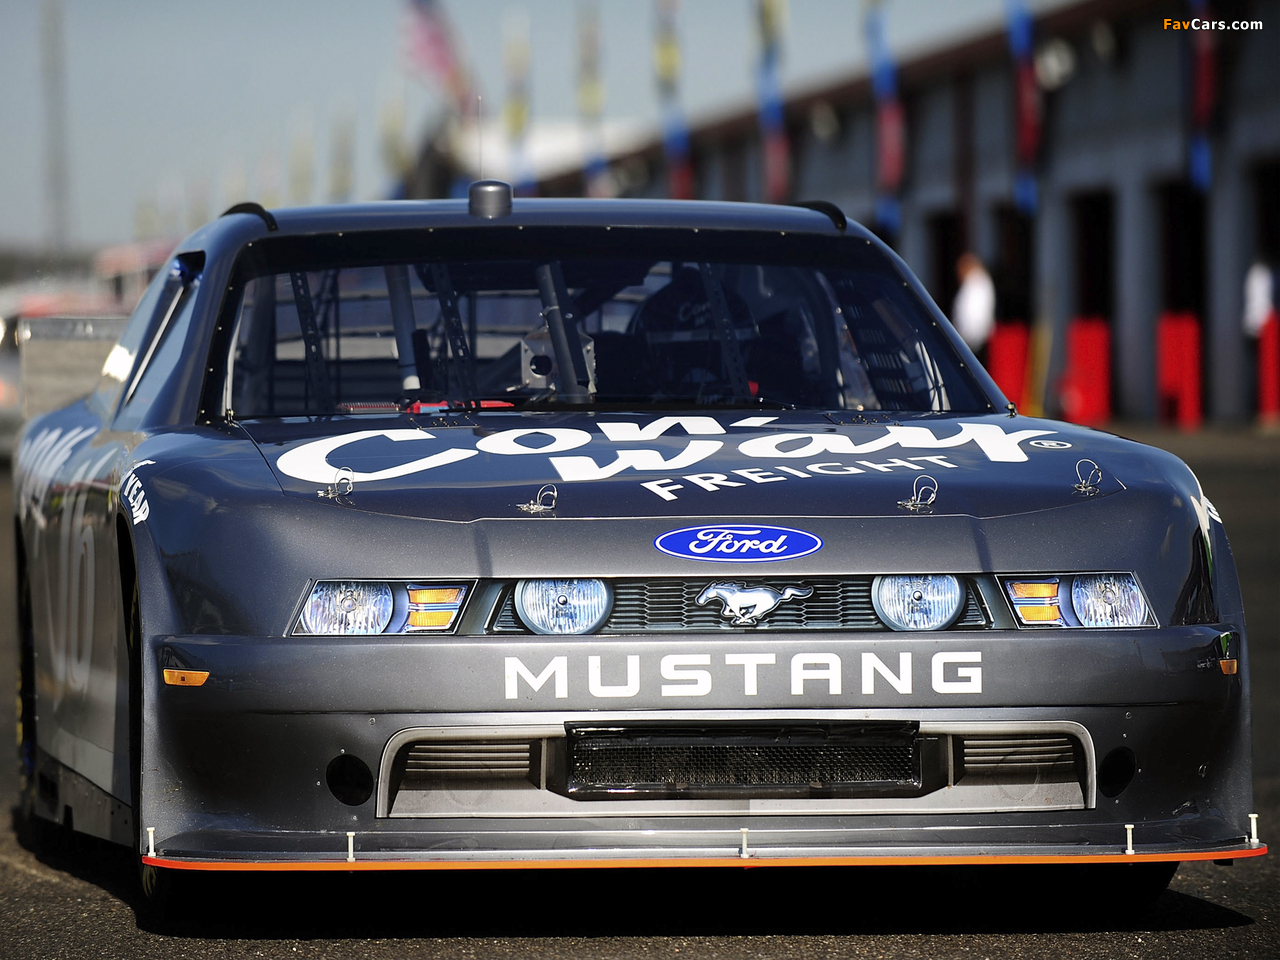 Mustang NASCAR Nationwide Series Race Car 2010 images (1280 x 960)